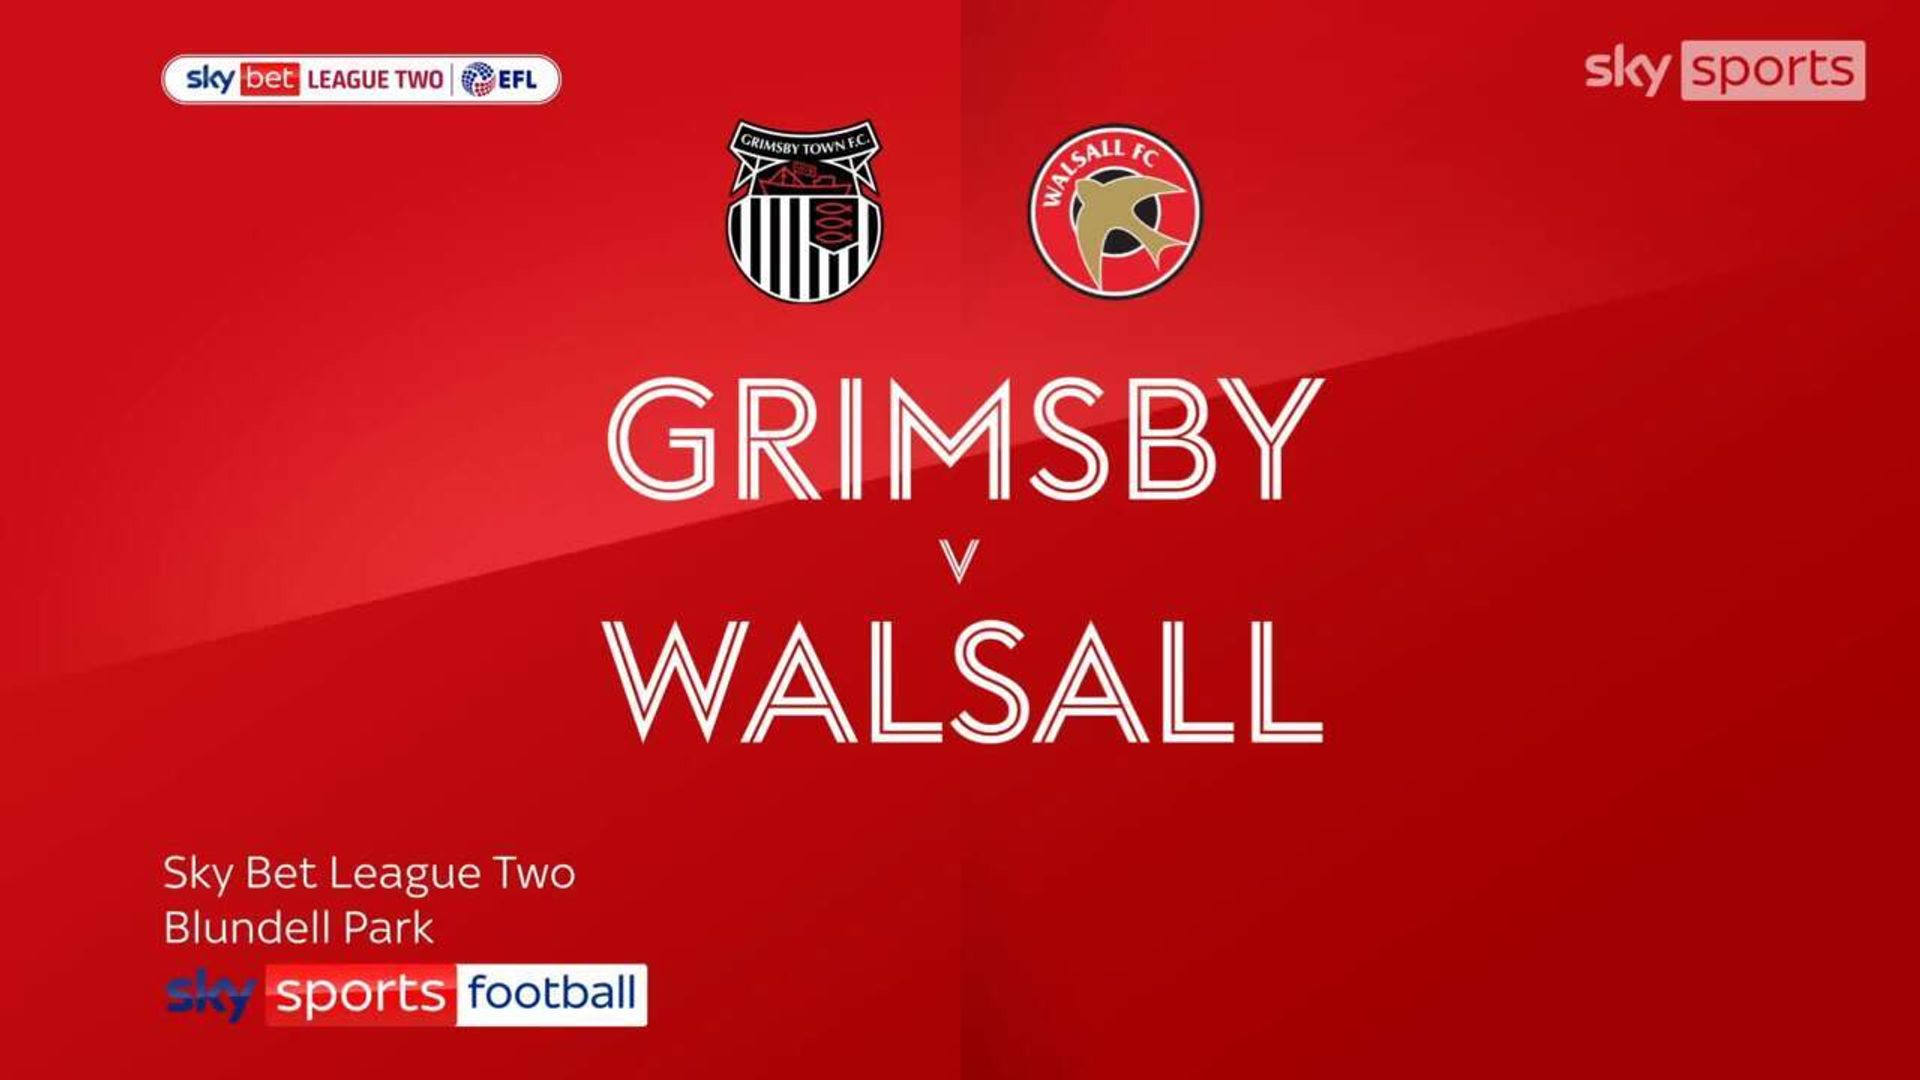 Grimsby 1-6 Walsall